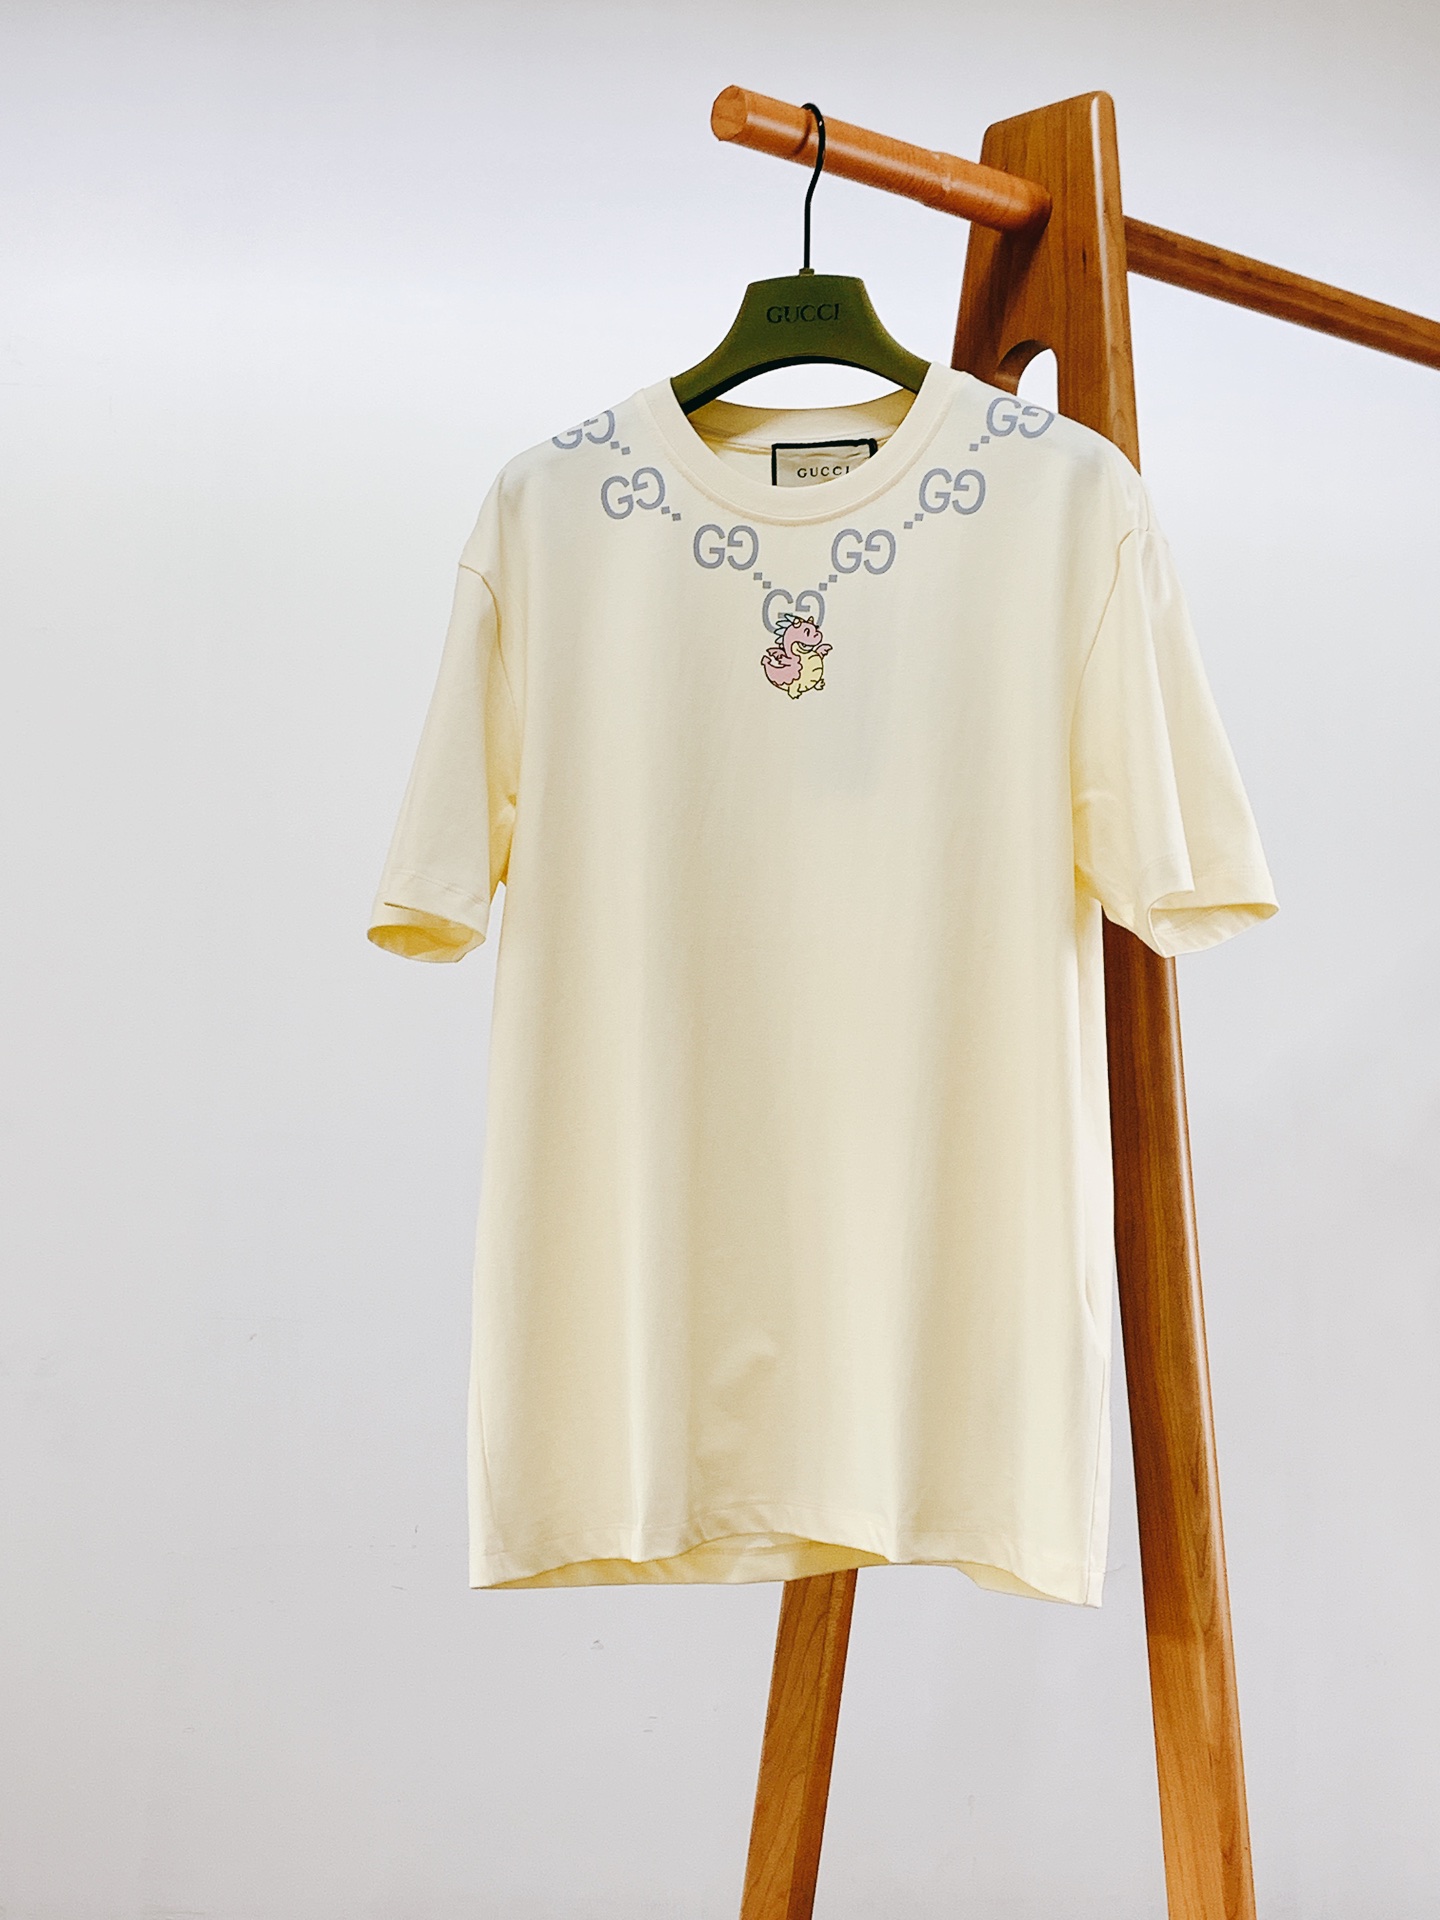 Gucci Clothing T-Shirt 7 Star Quality Designer Replica
 Printing Unisex Spring/Summer Collection Short Sleeve